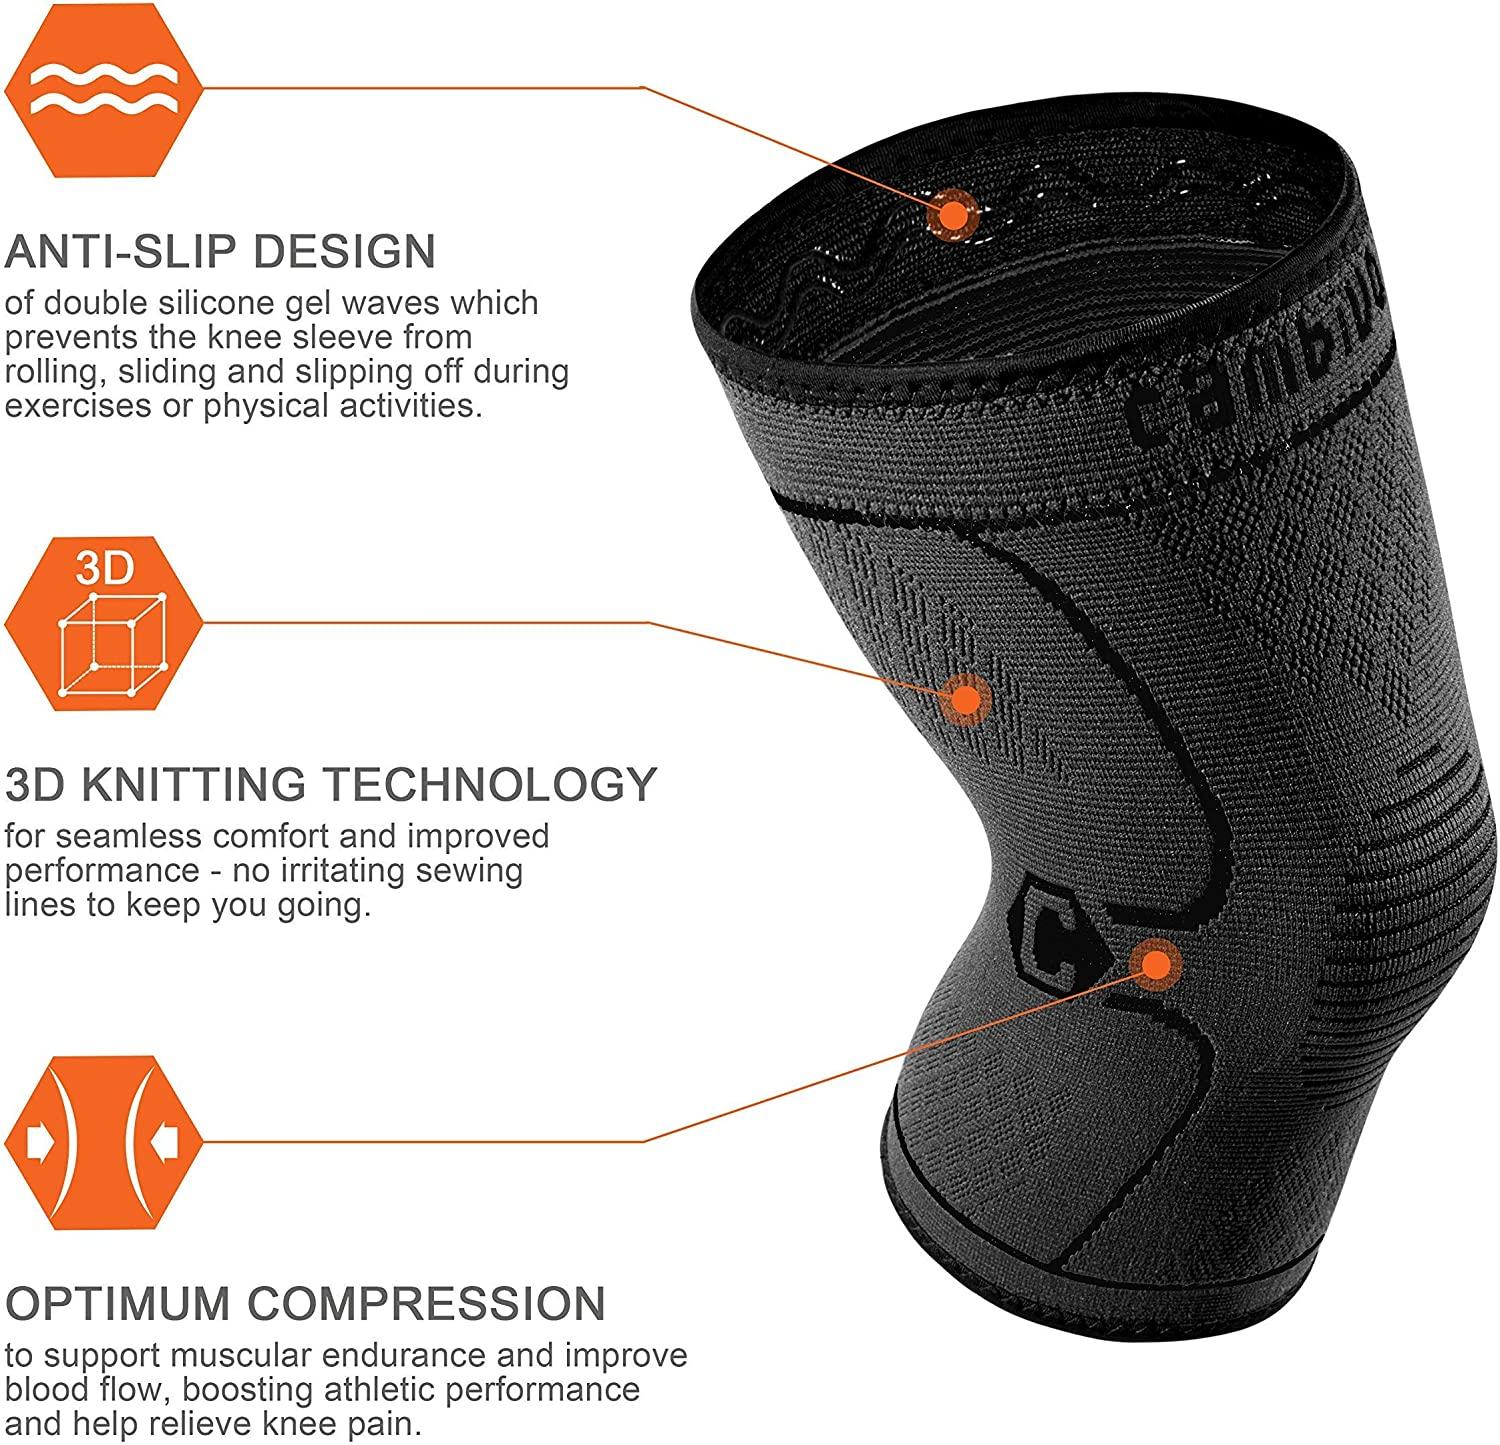 Buy CAMBIVO Knee Brace, Knee Compression Sleeve Support- (M) at ShopLC.